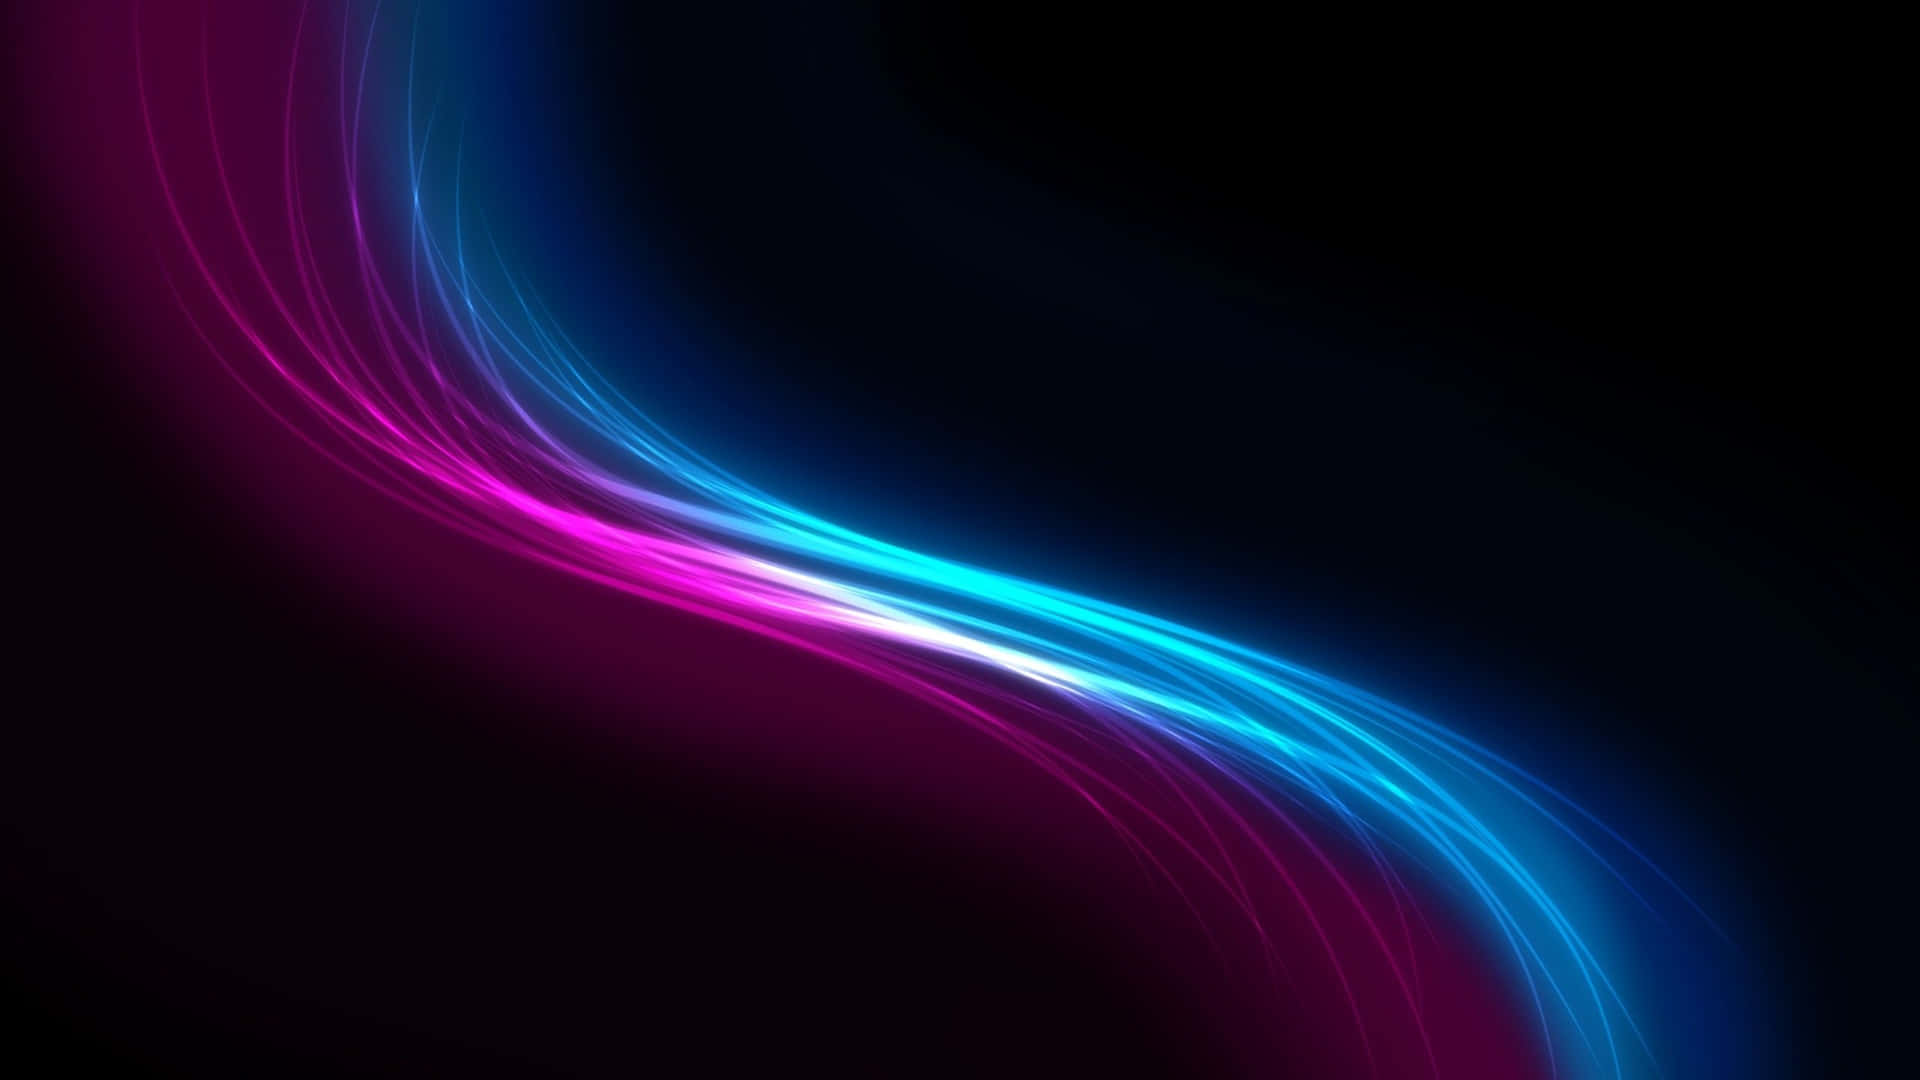 Brighten up your day with a beautiful glow background